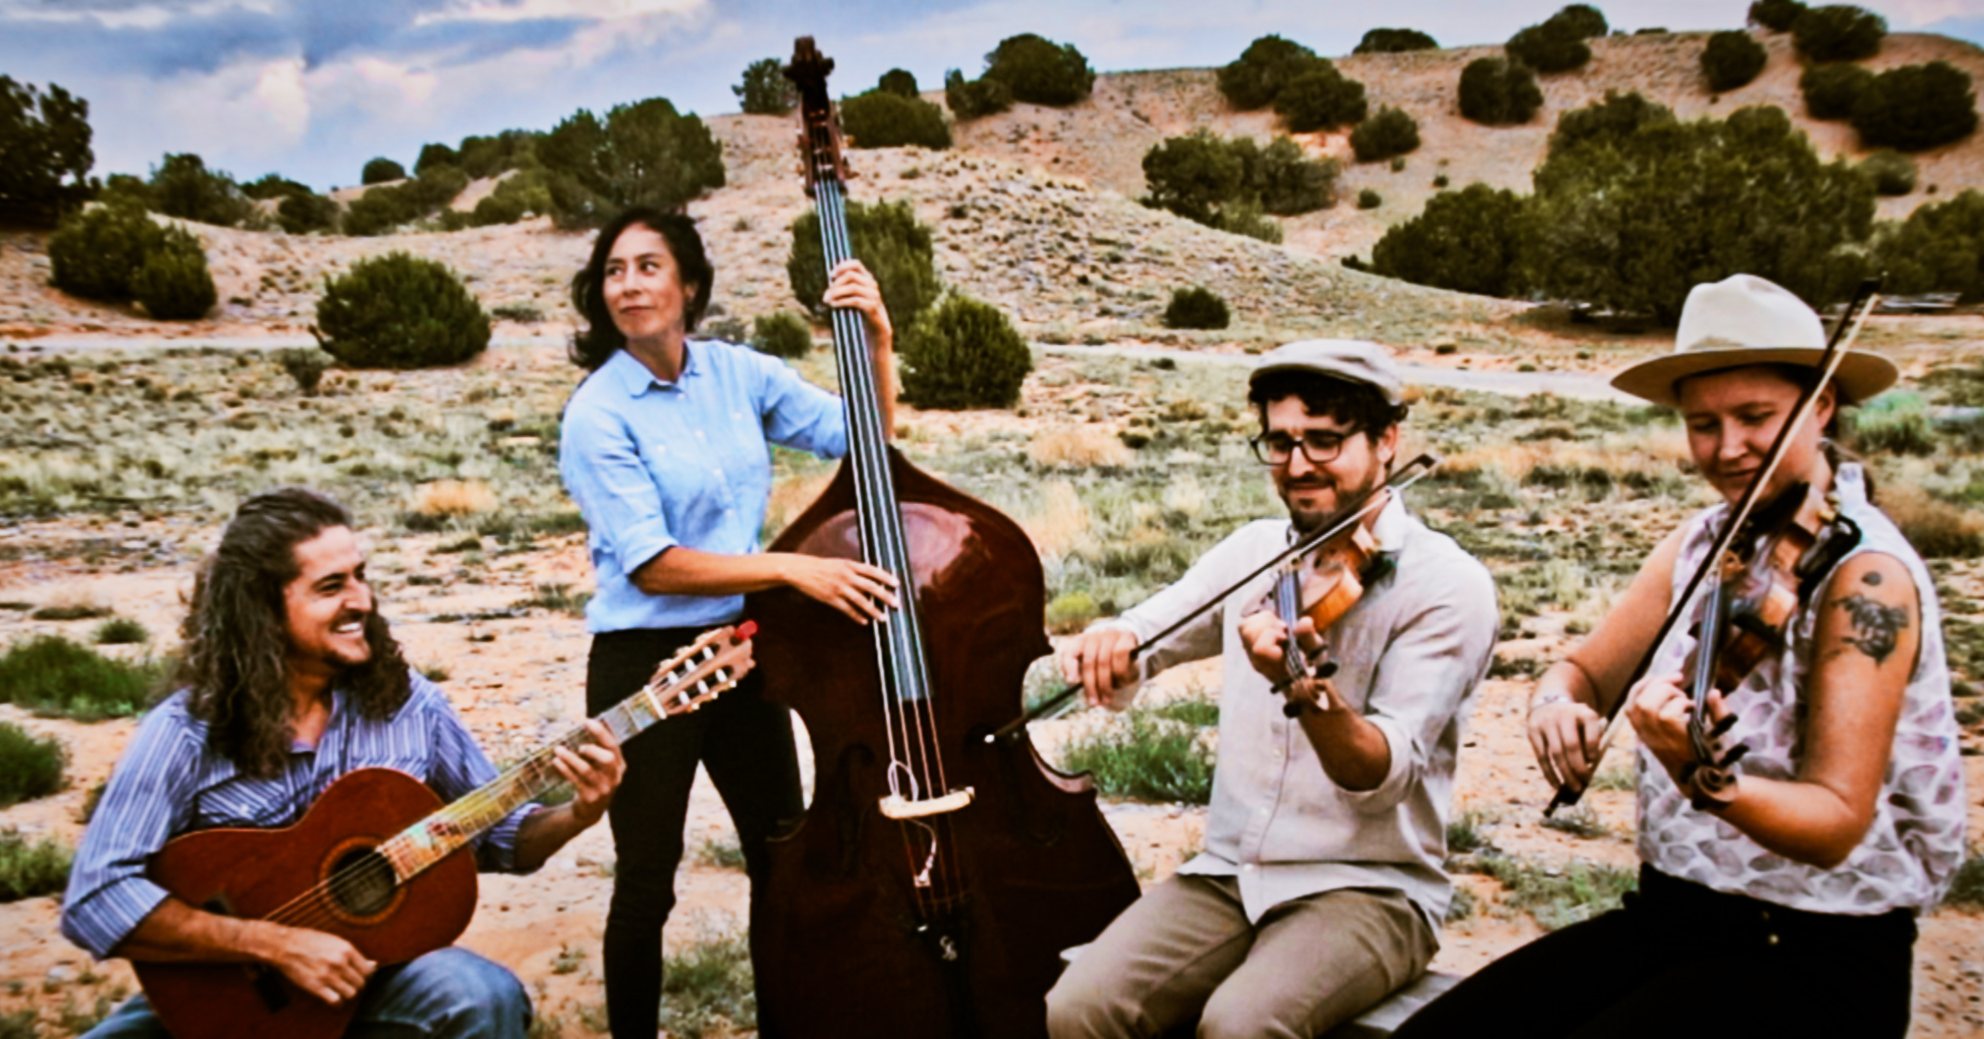 a group of people playing instruments in a field